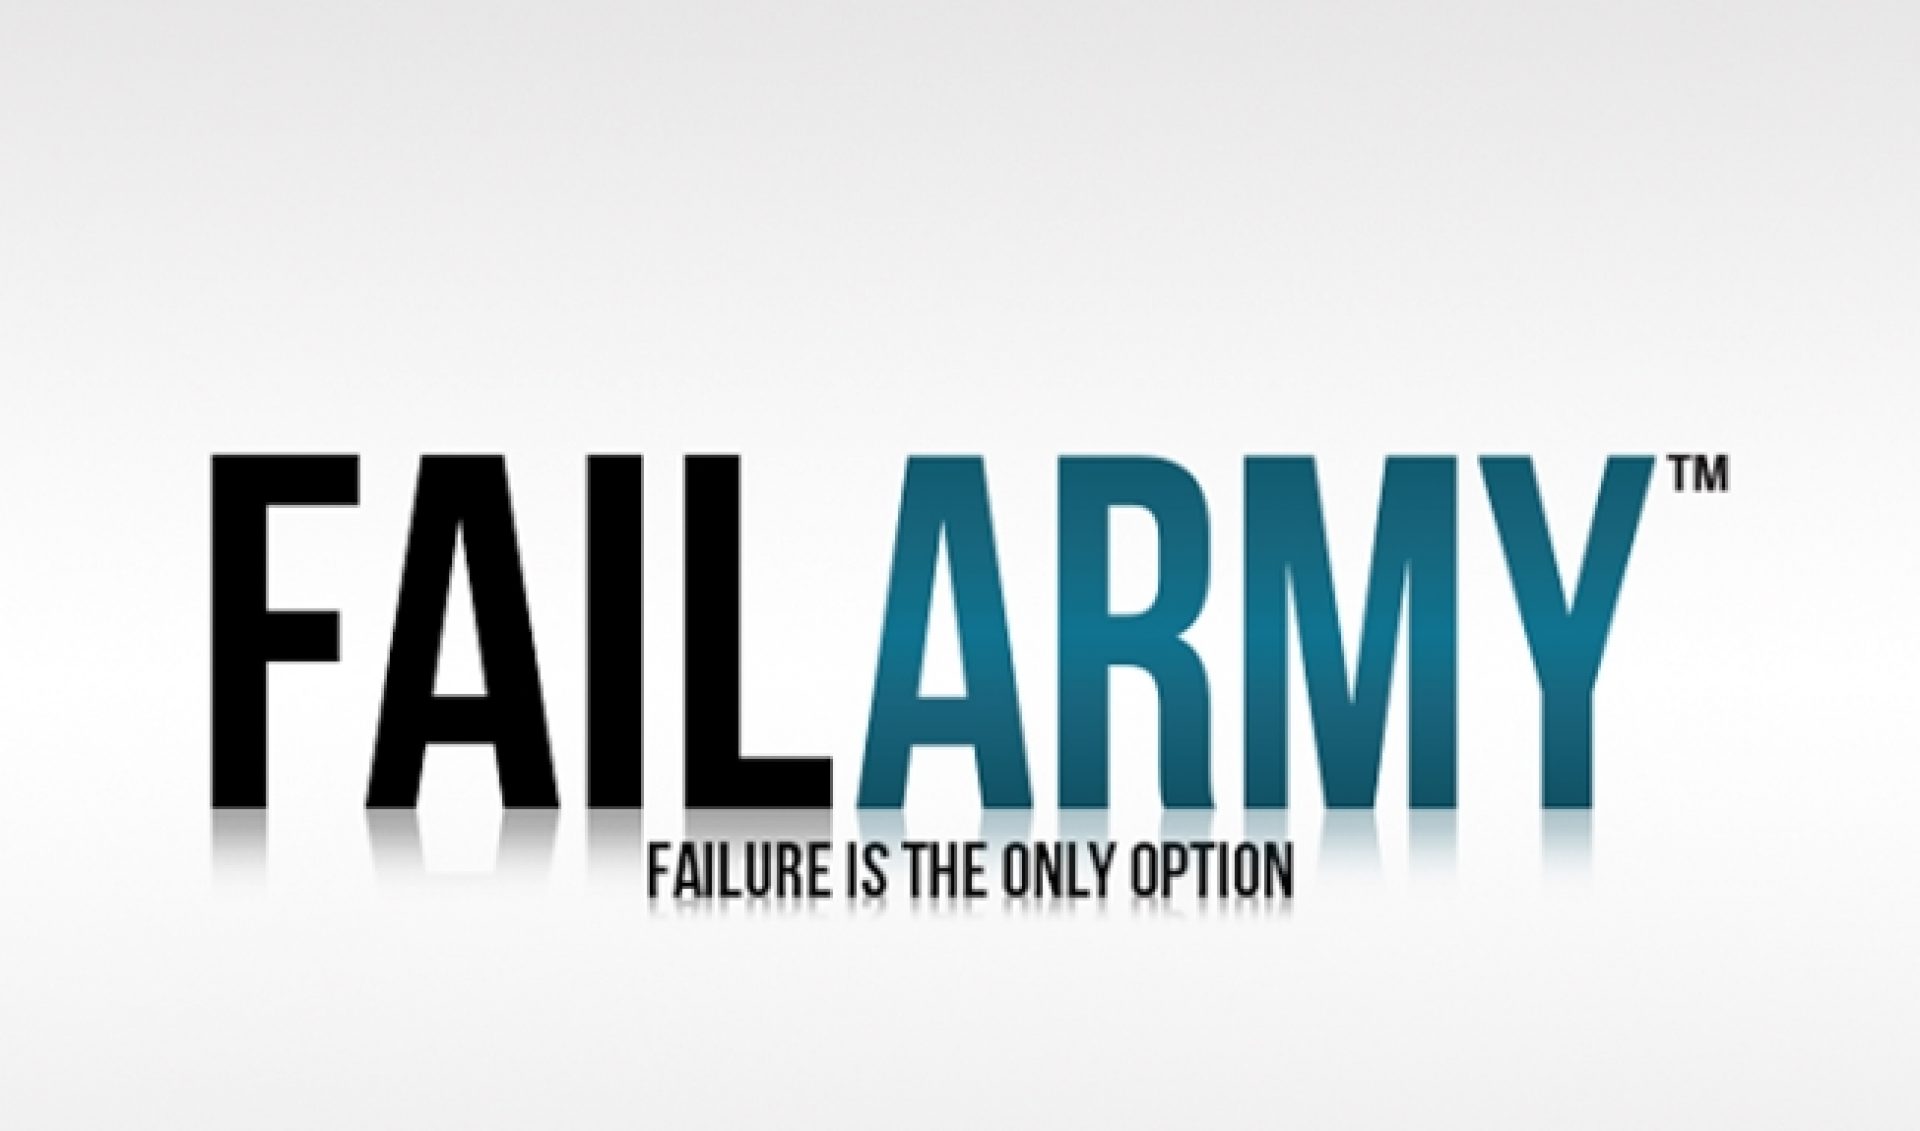 At 5 Million Subs, FailArmy Comes To The Skies Through Virgin America